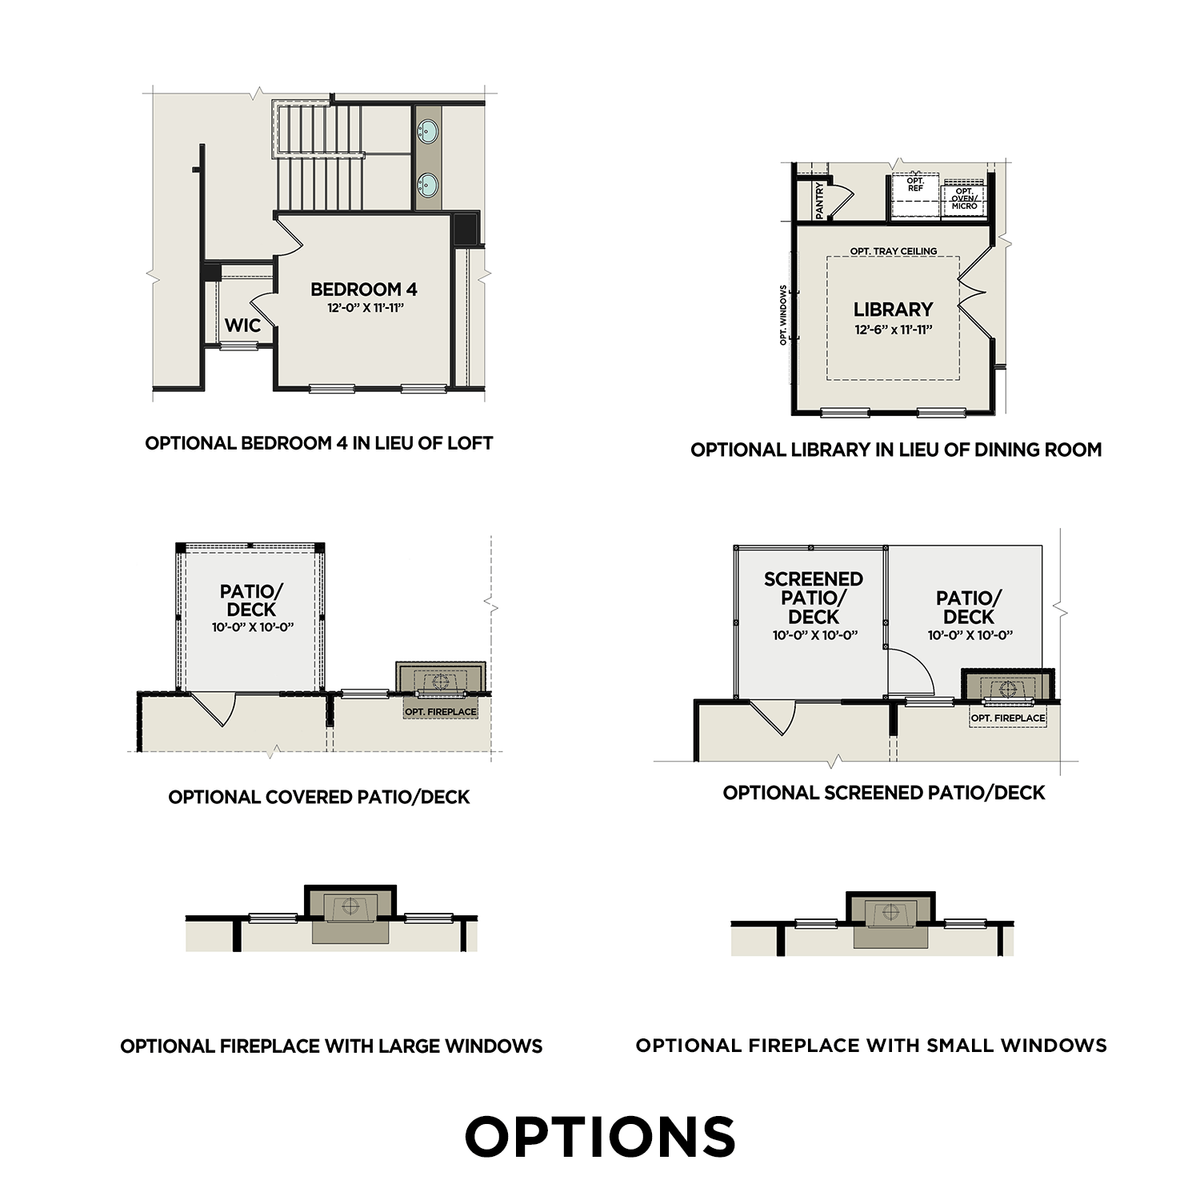 4 - The Willow D- Unfinished Basement  floor plan layout for 101 Honeydew Lane in Davidson Homes' Riverwood community.